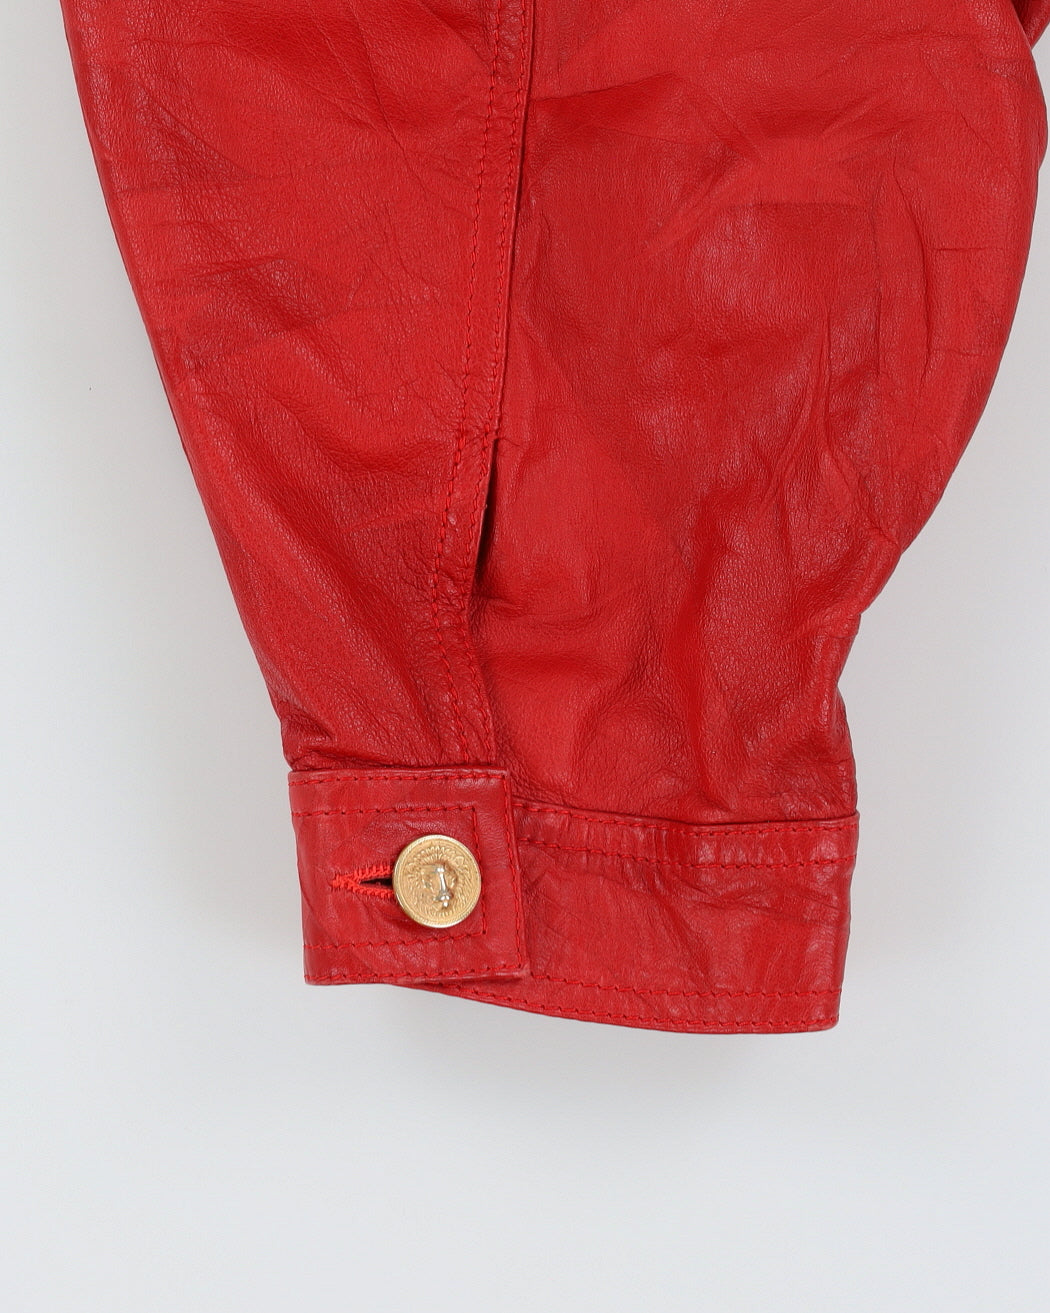 Versus Gianni Versace Red Leather Bomber Jacket - M